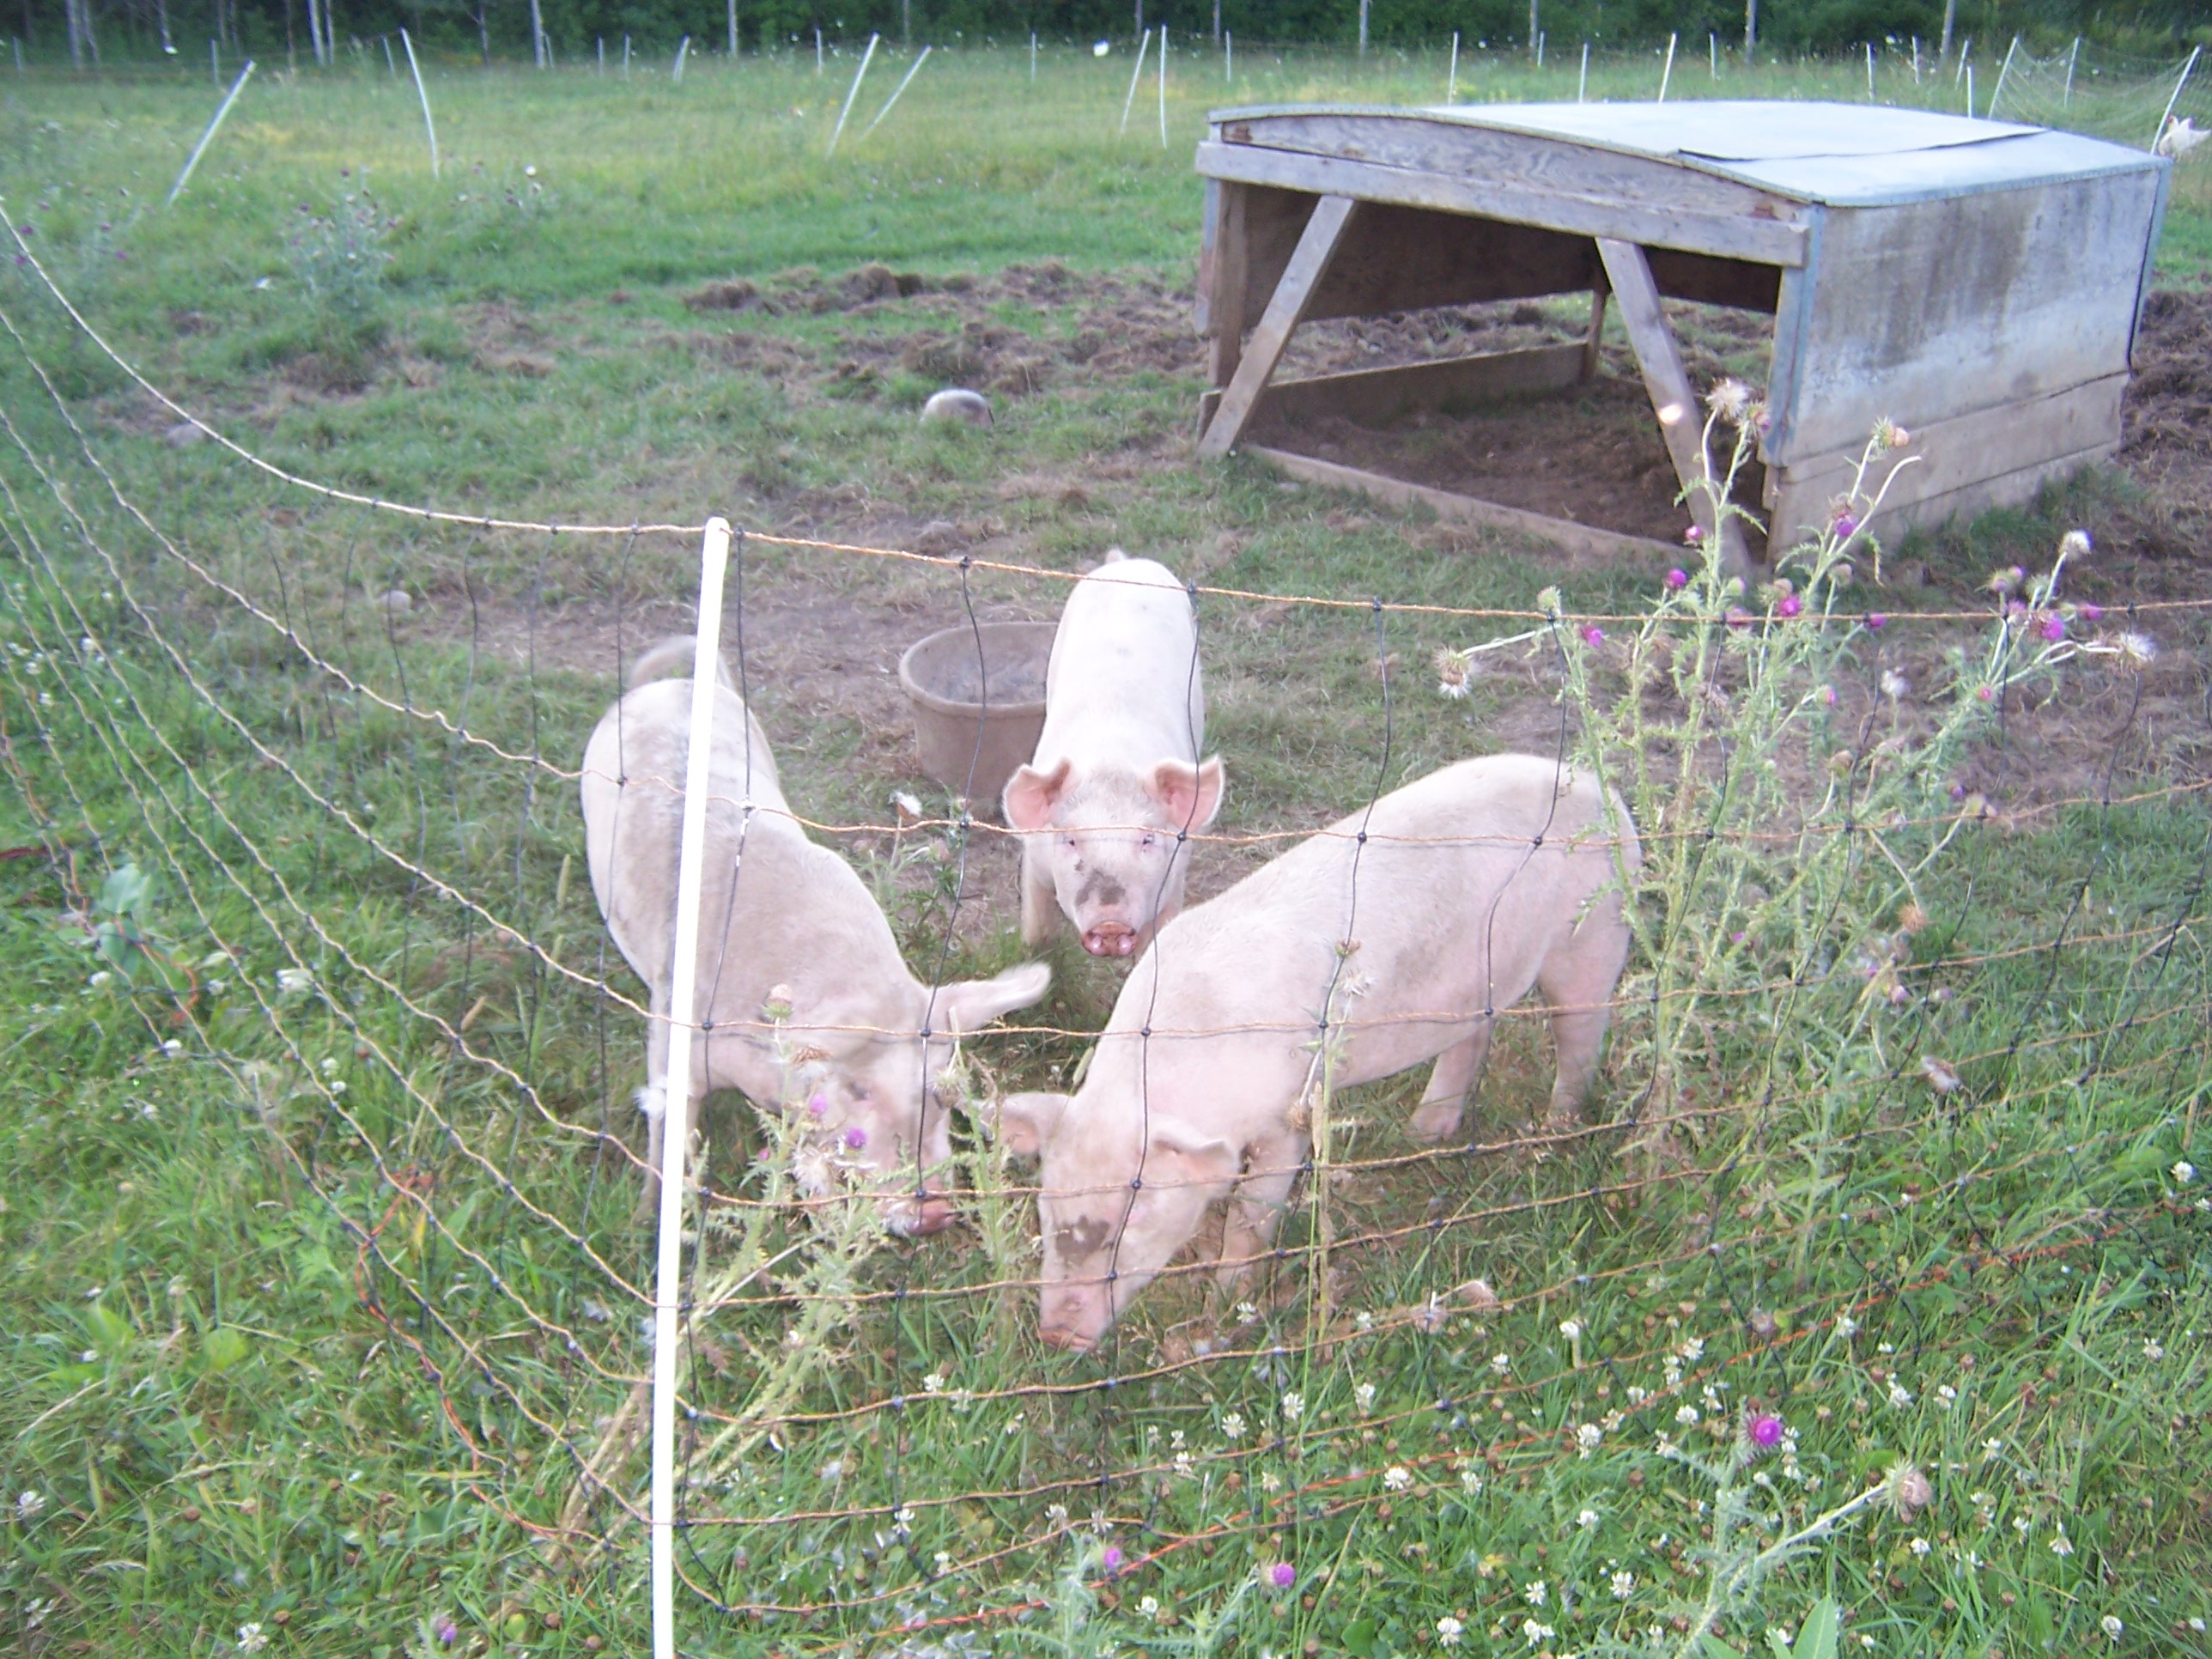 pigs on the garden safely behind electric fence